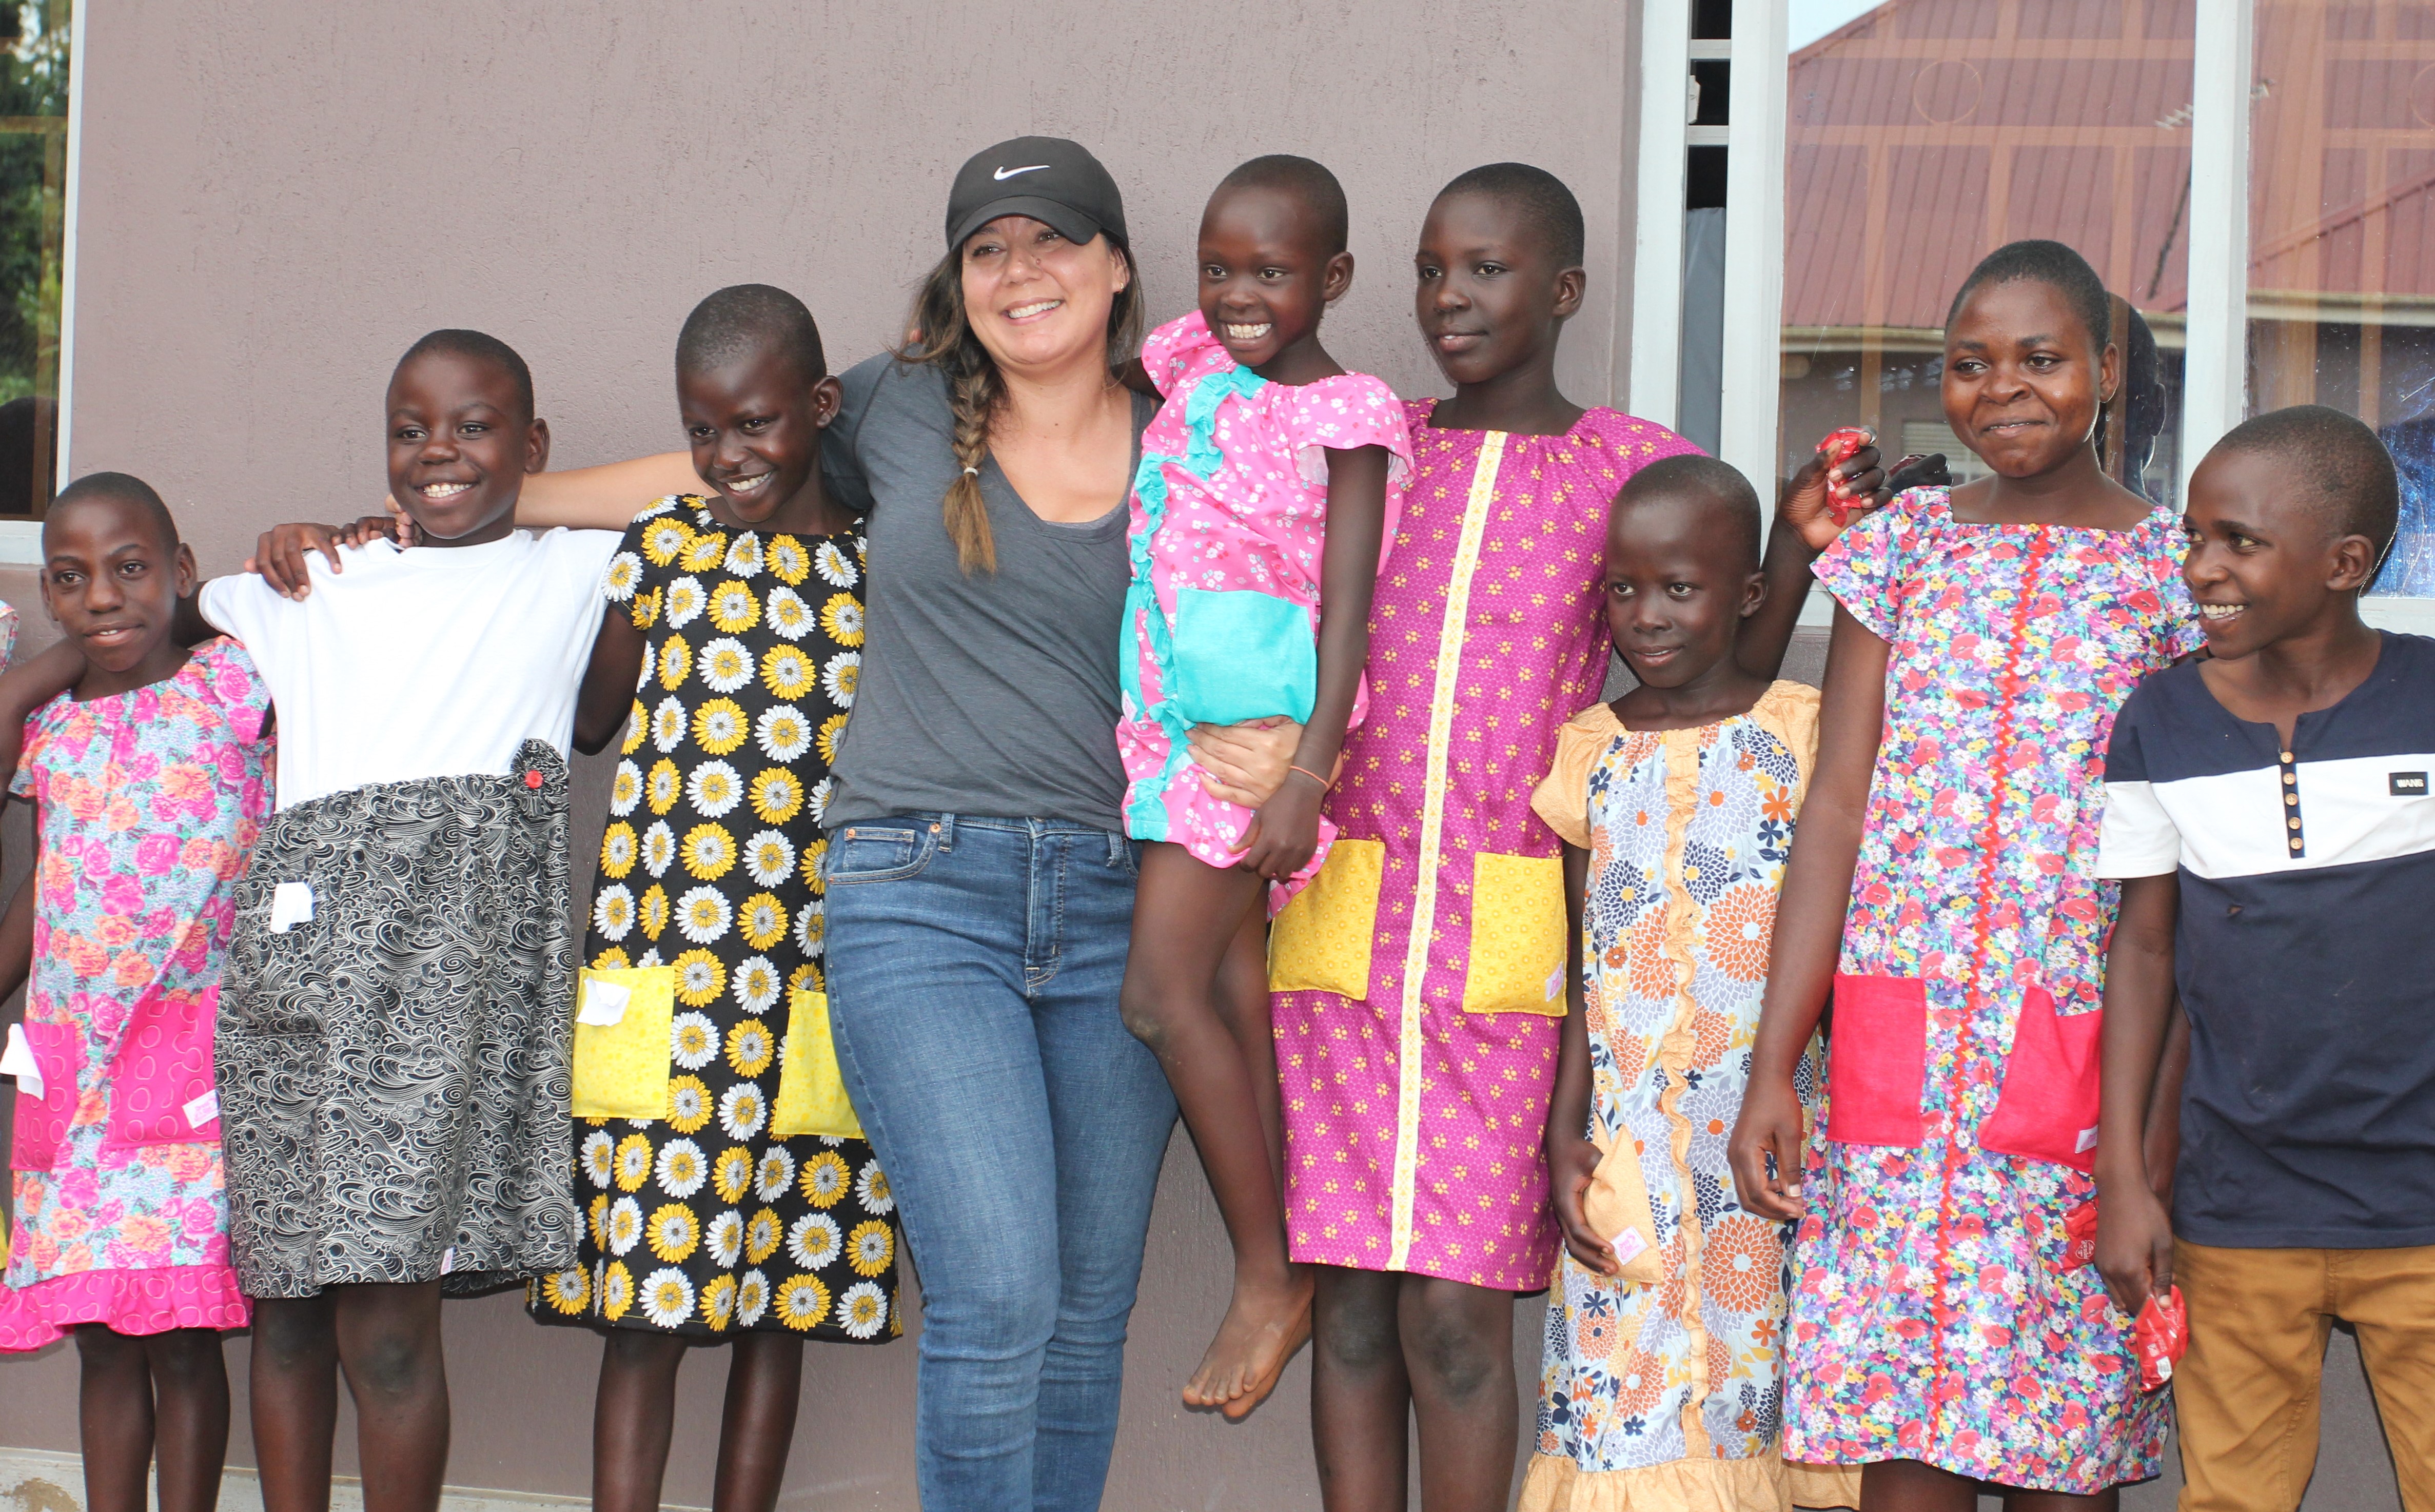 Erica Estrella stands with children who received Dress a Girl Around the World dresses